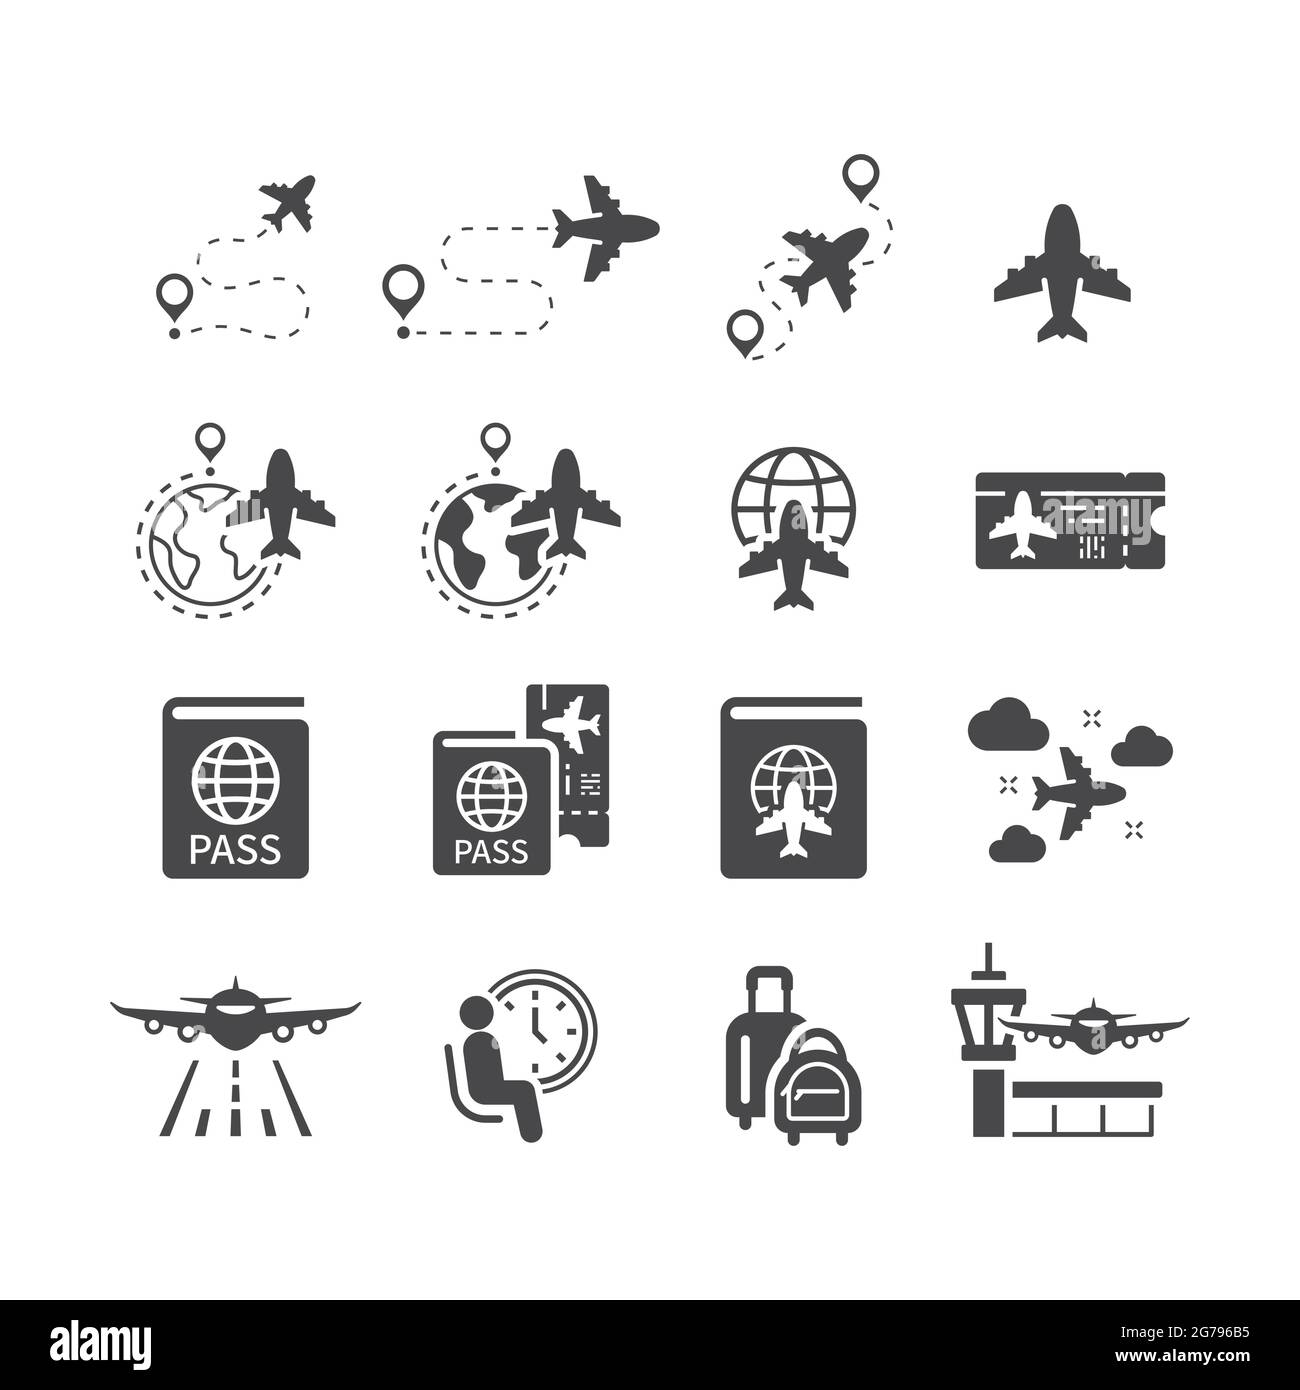 Airport, airline and airplane black vector icon set. Travel, boarding pass, flight route icons. Stock Vector